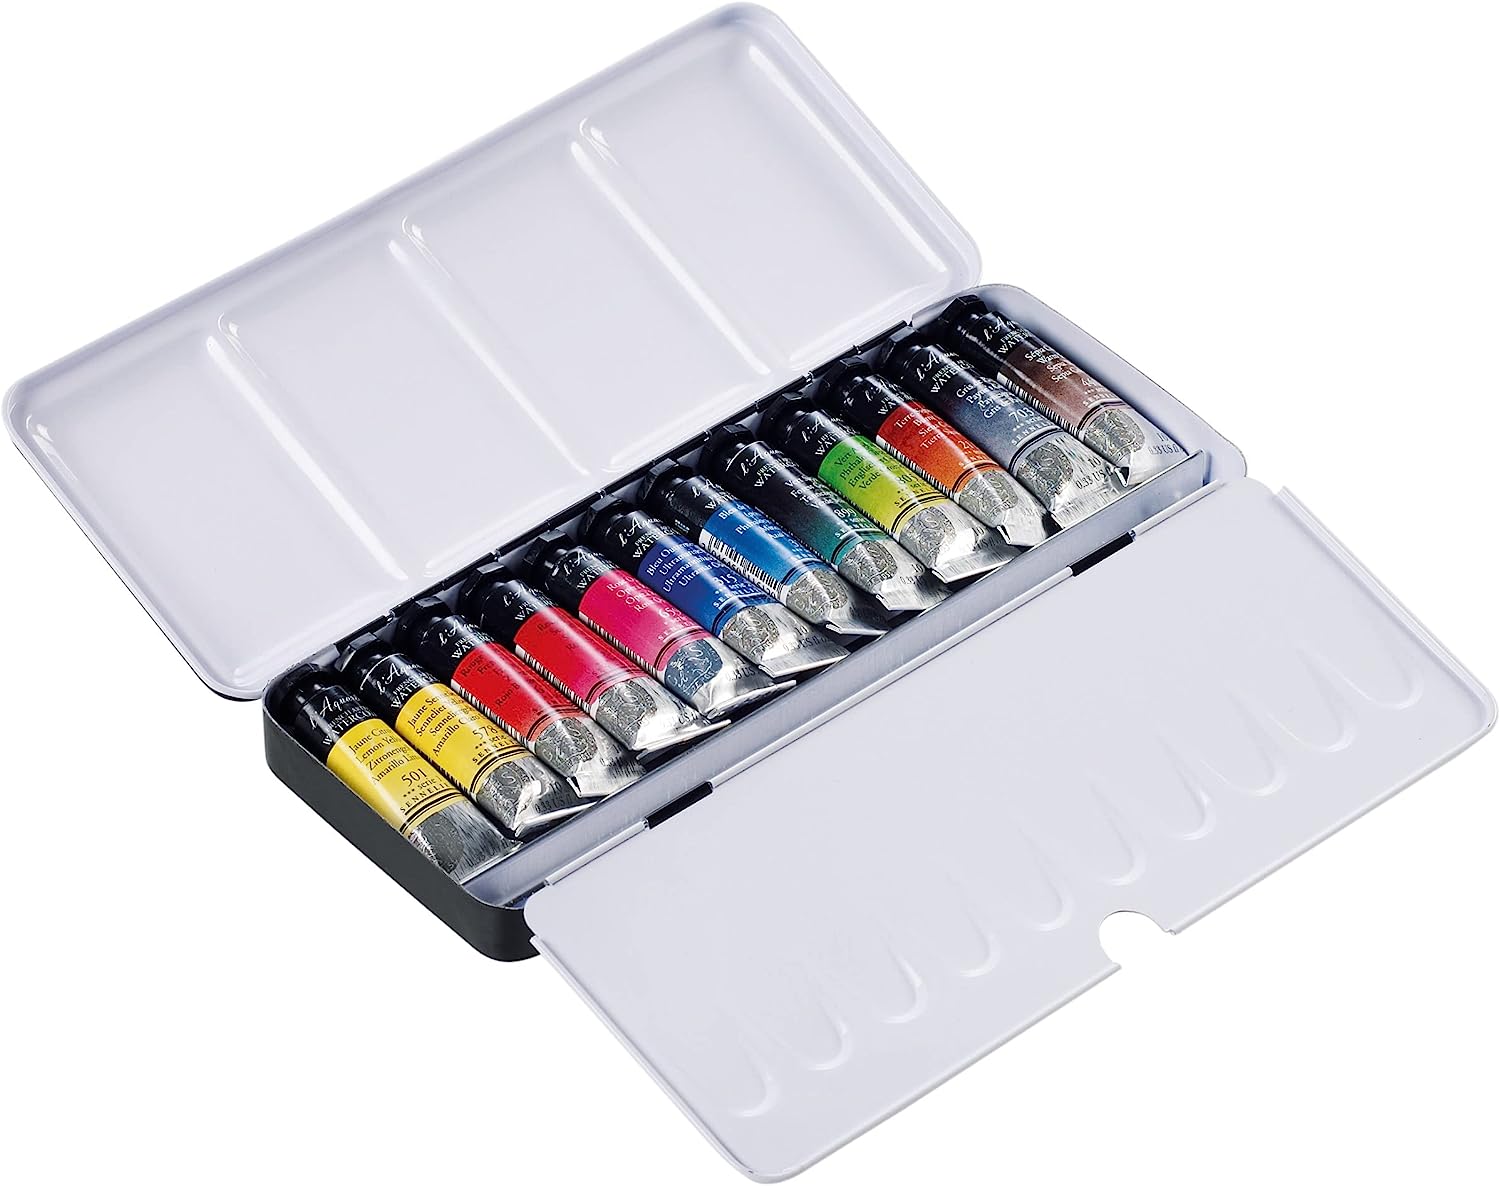  Sennelier French Artists' Watercolor Set, 10ml Tubes